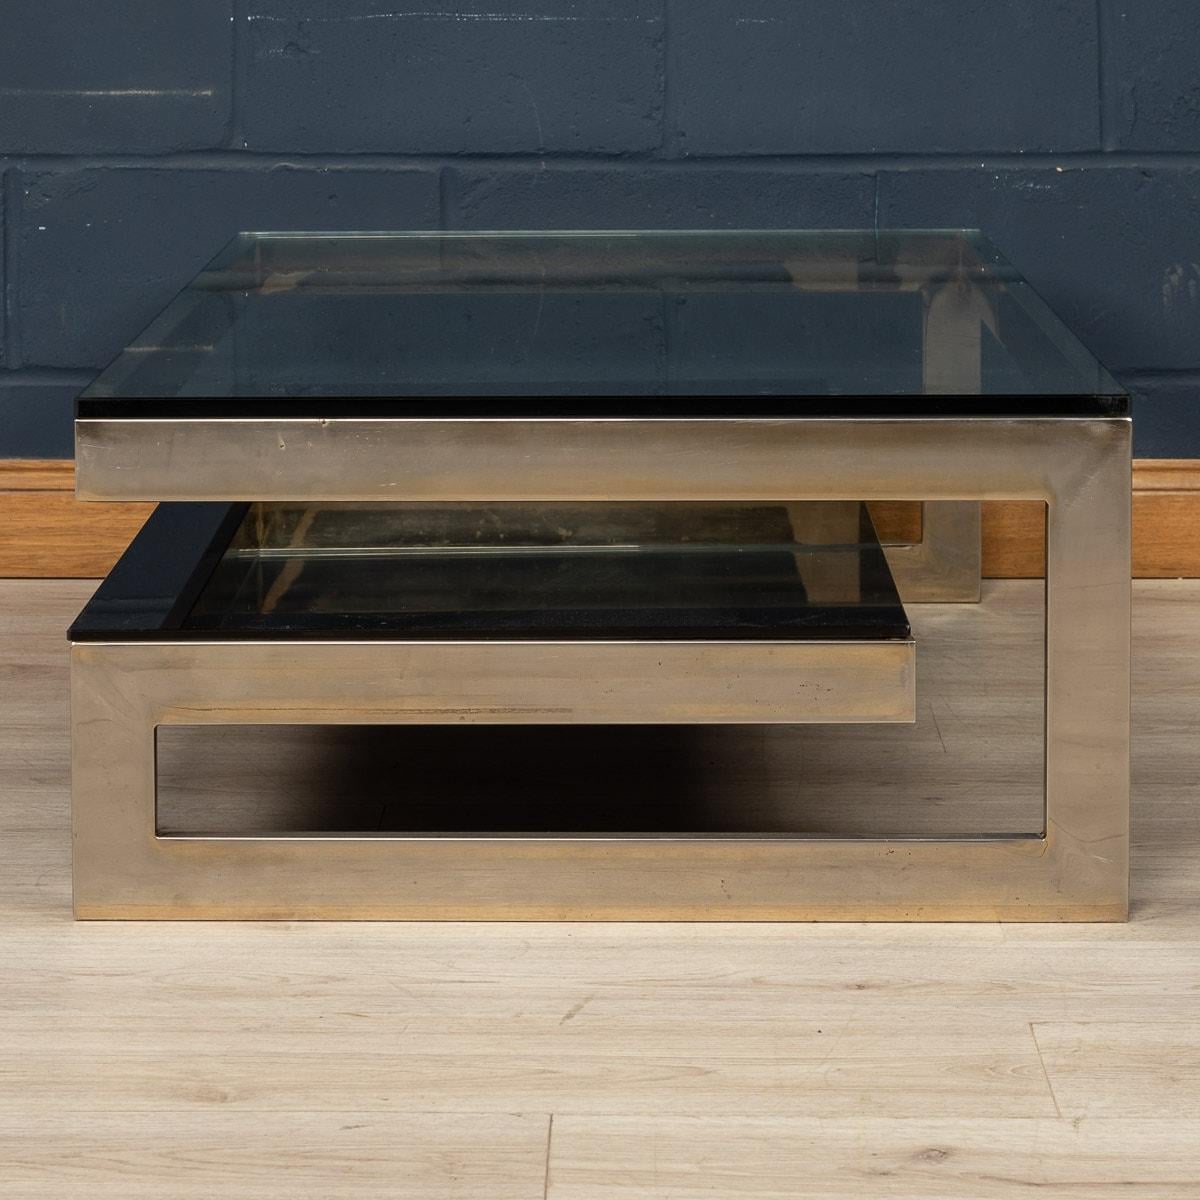 20th Century Brass & Glass Coffee Table By Belgo Chrom, Belgium, c.1980 In Good Condition For Sale In Royal Tunbridge Wells, Kent